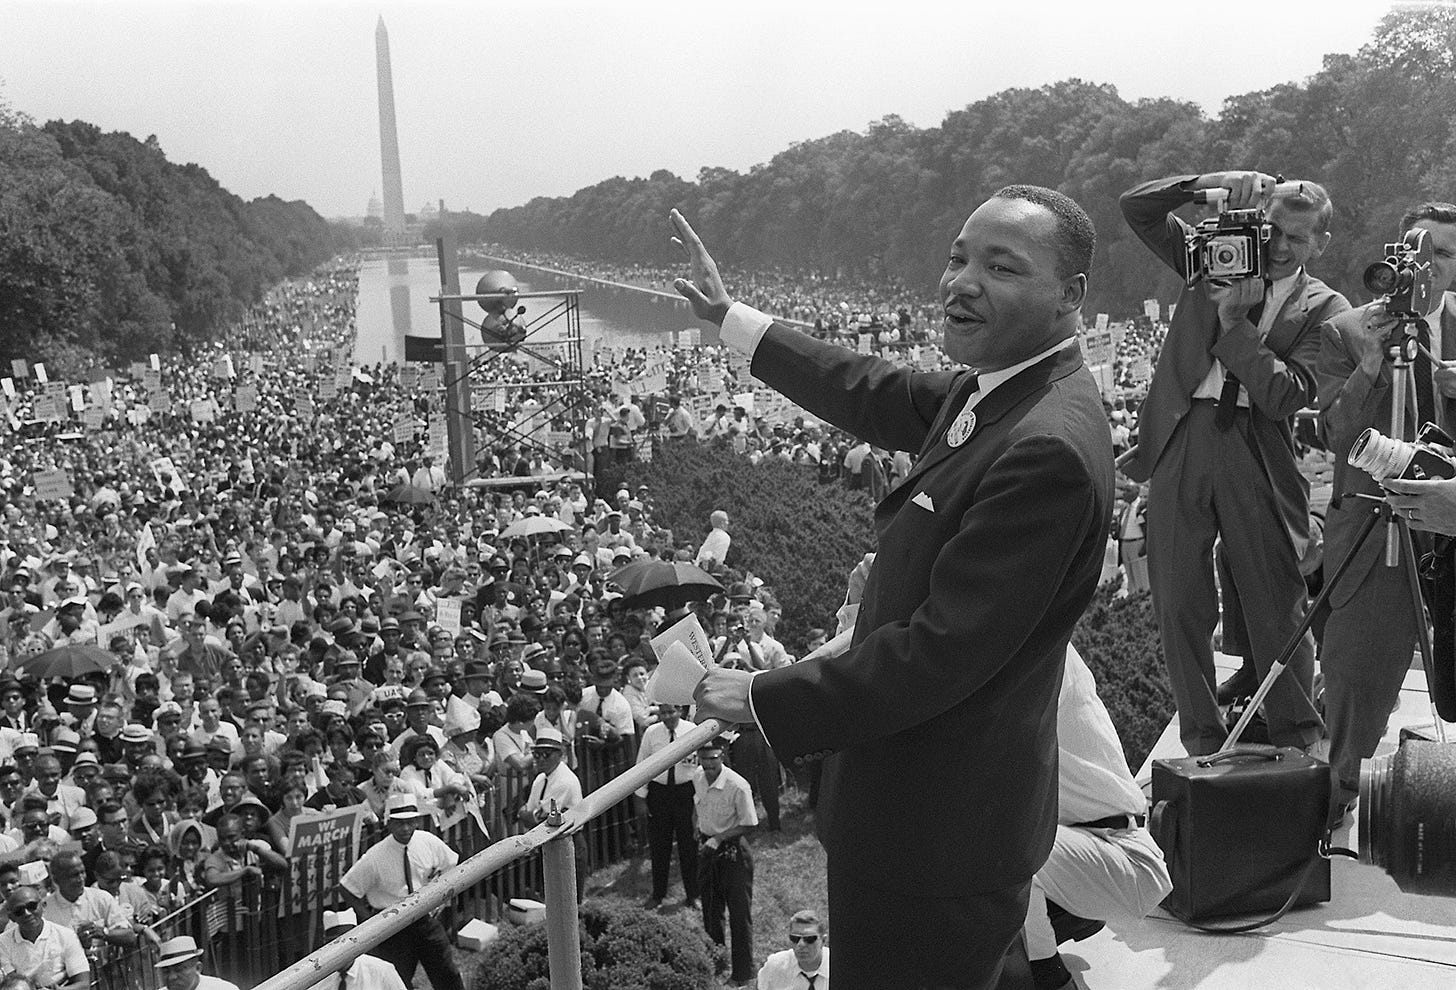 March on Washington: 5 things you didn't know about the 1963 march